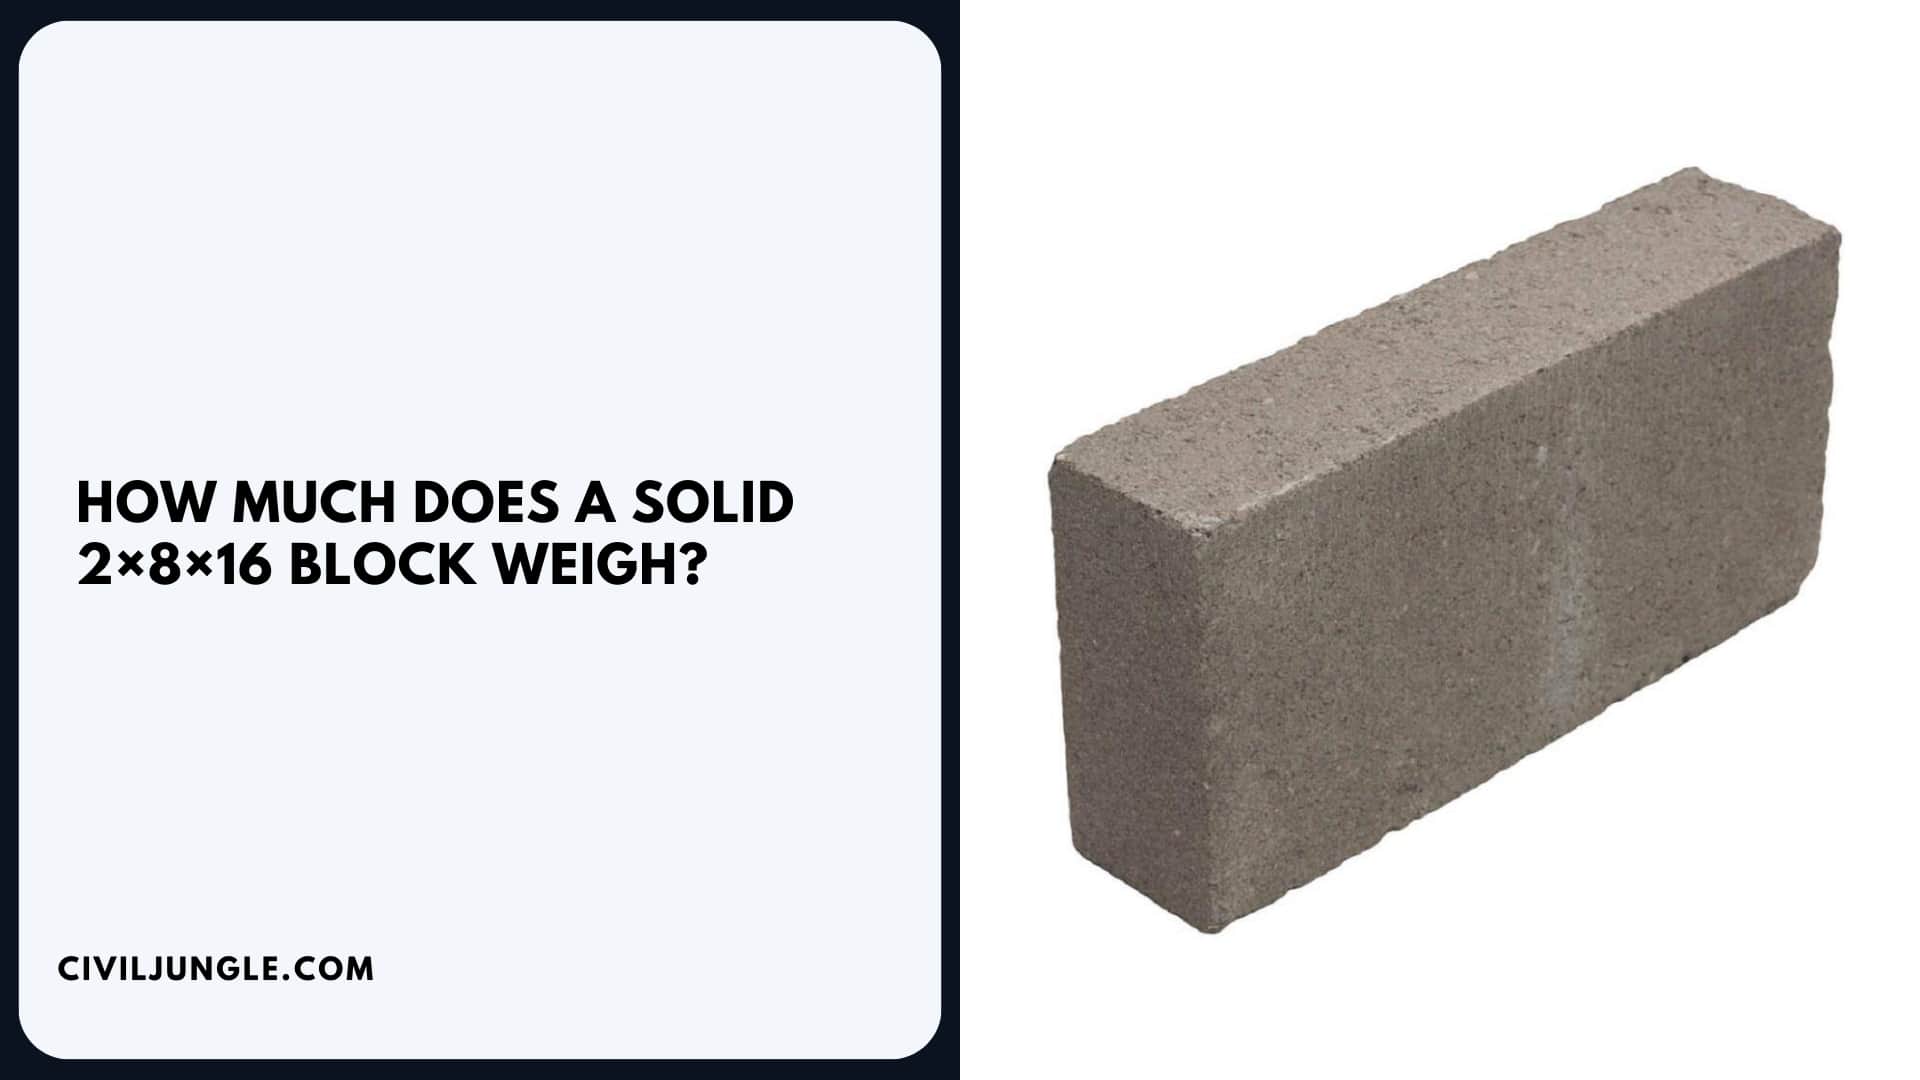 How Much Does a Solid 2×8×16 Block Weigh?